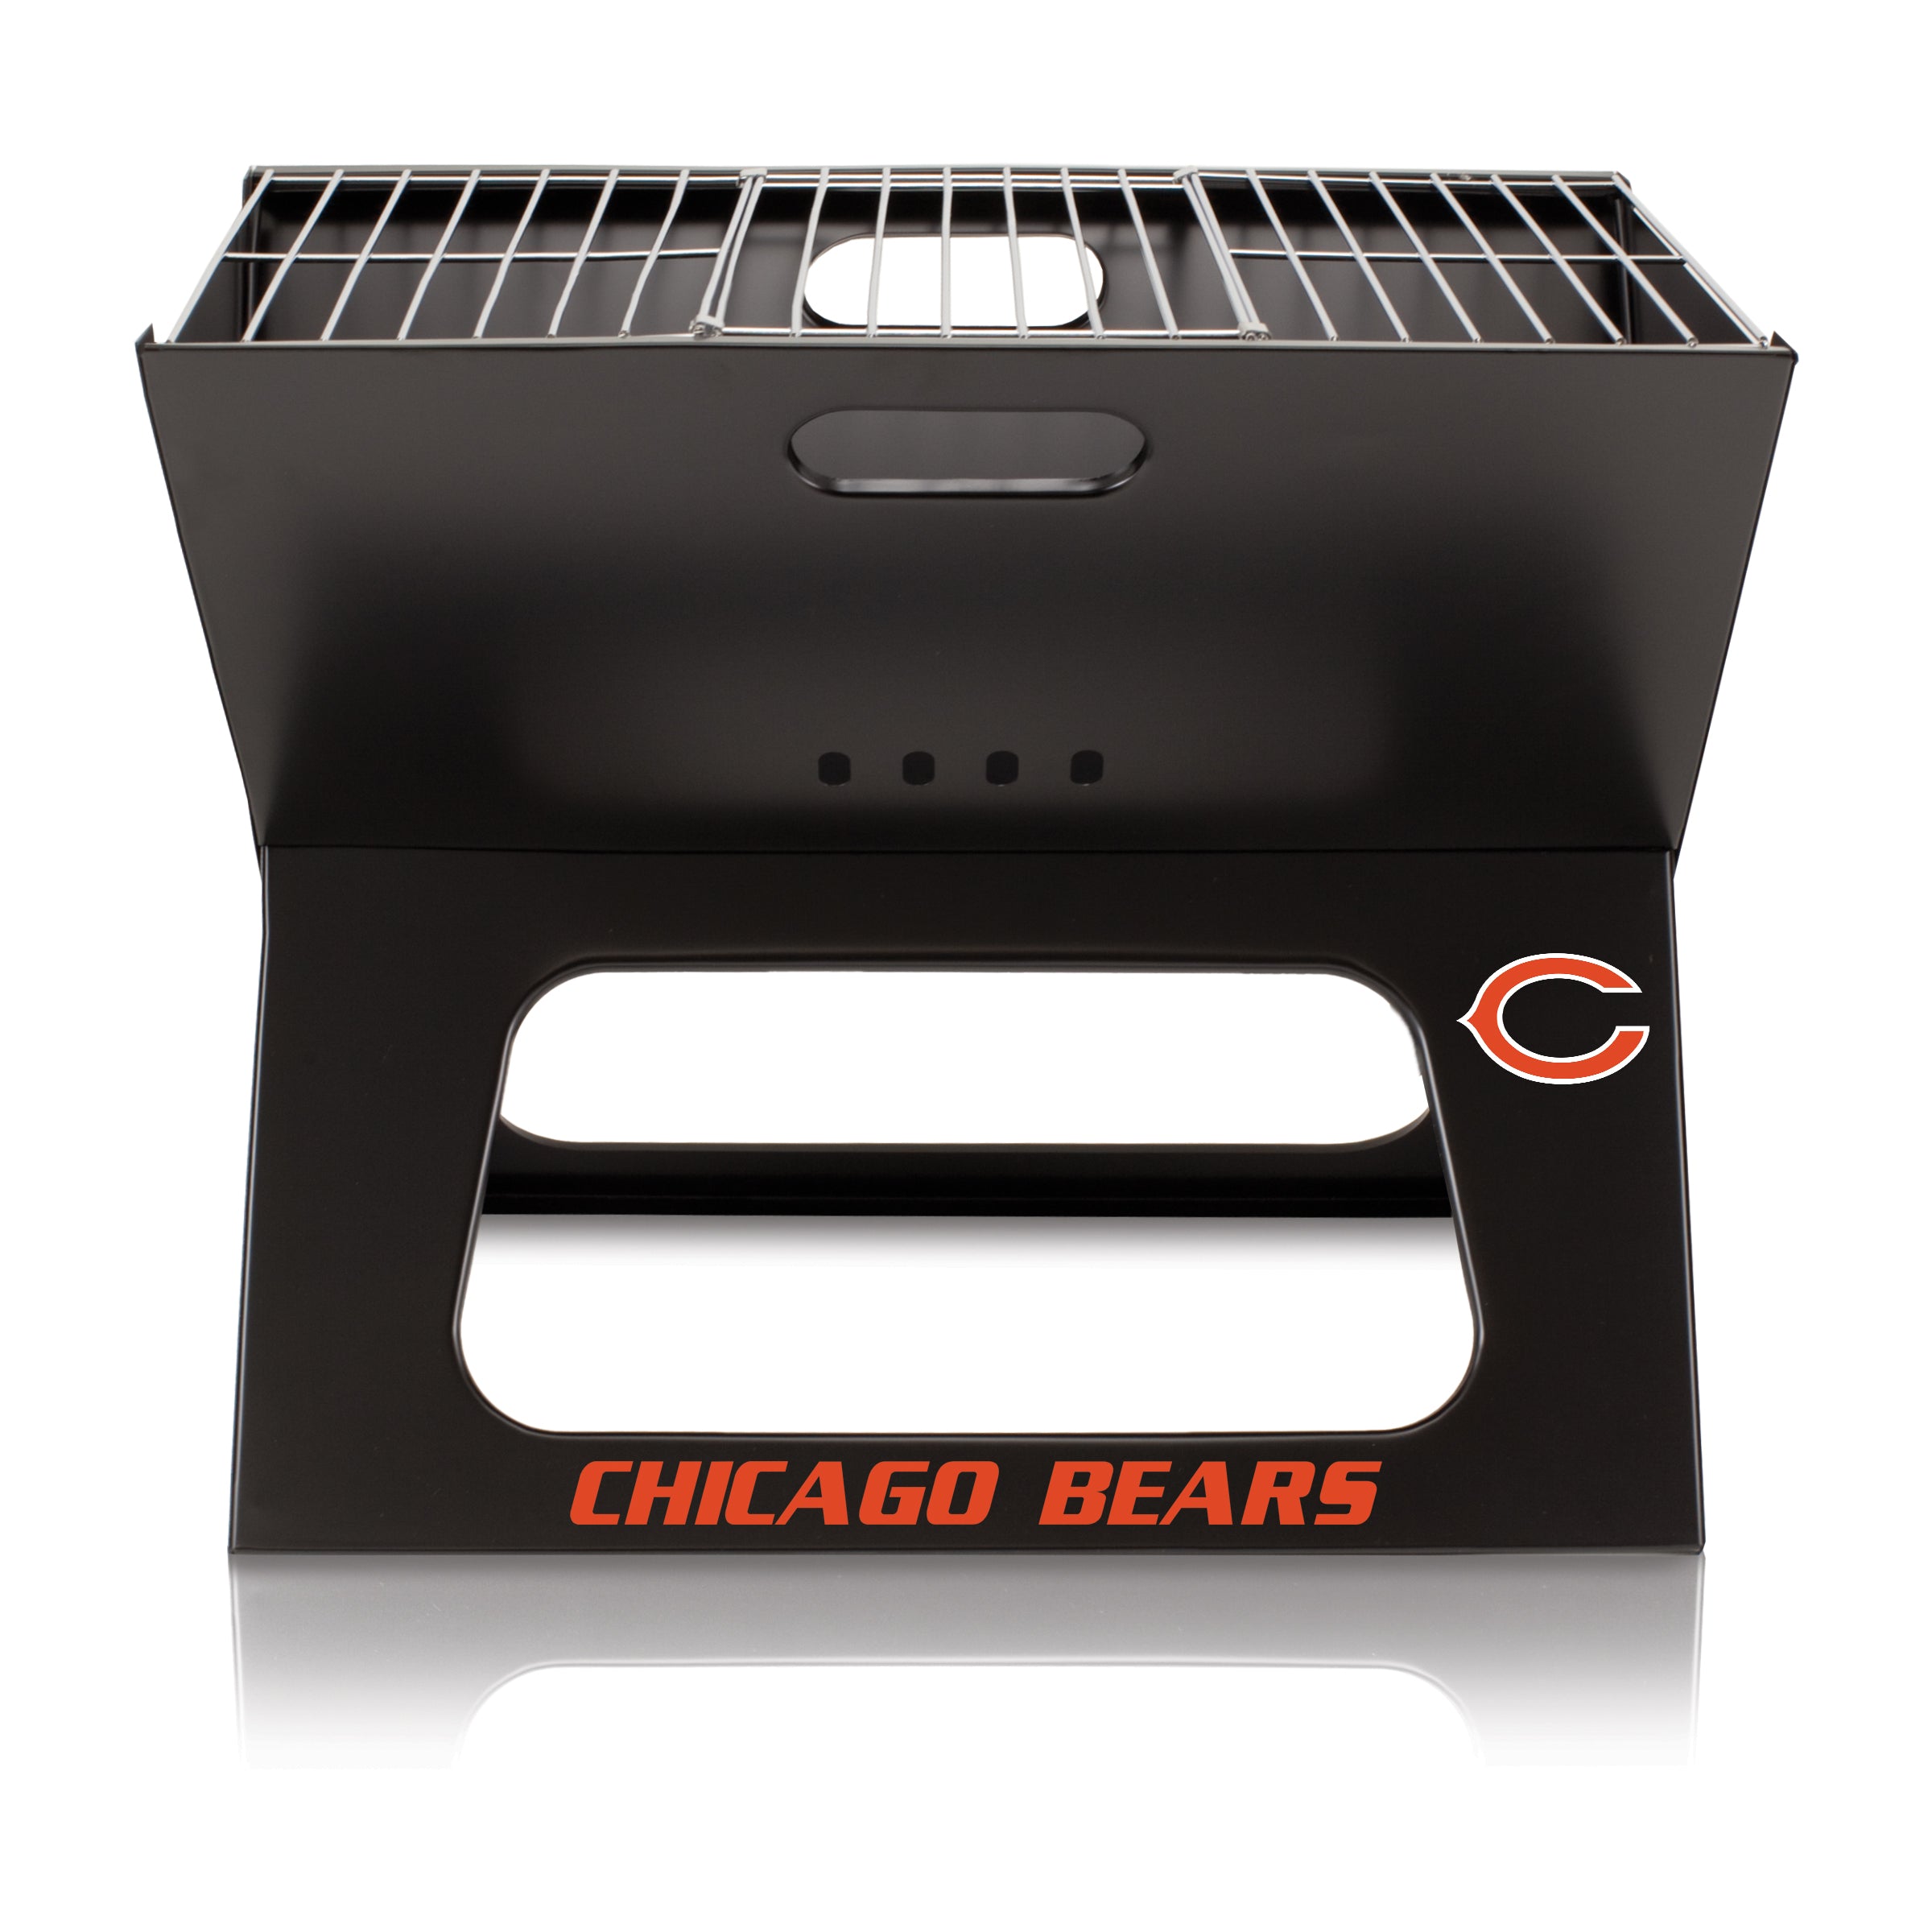 Chicago Bears - X-Grill Portable Charcoal BBQ Grill